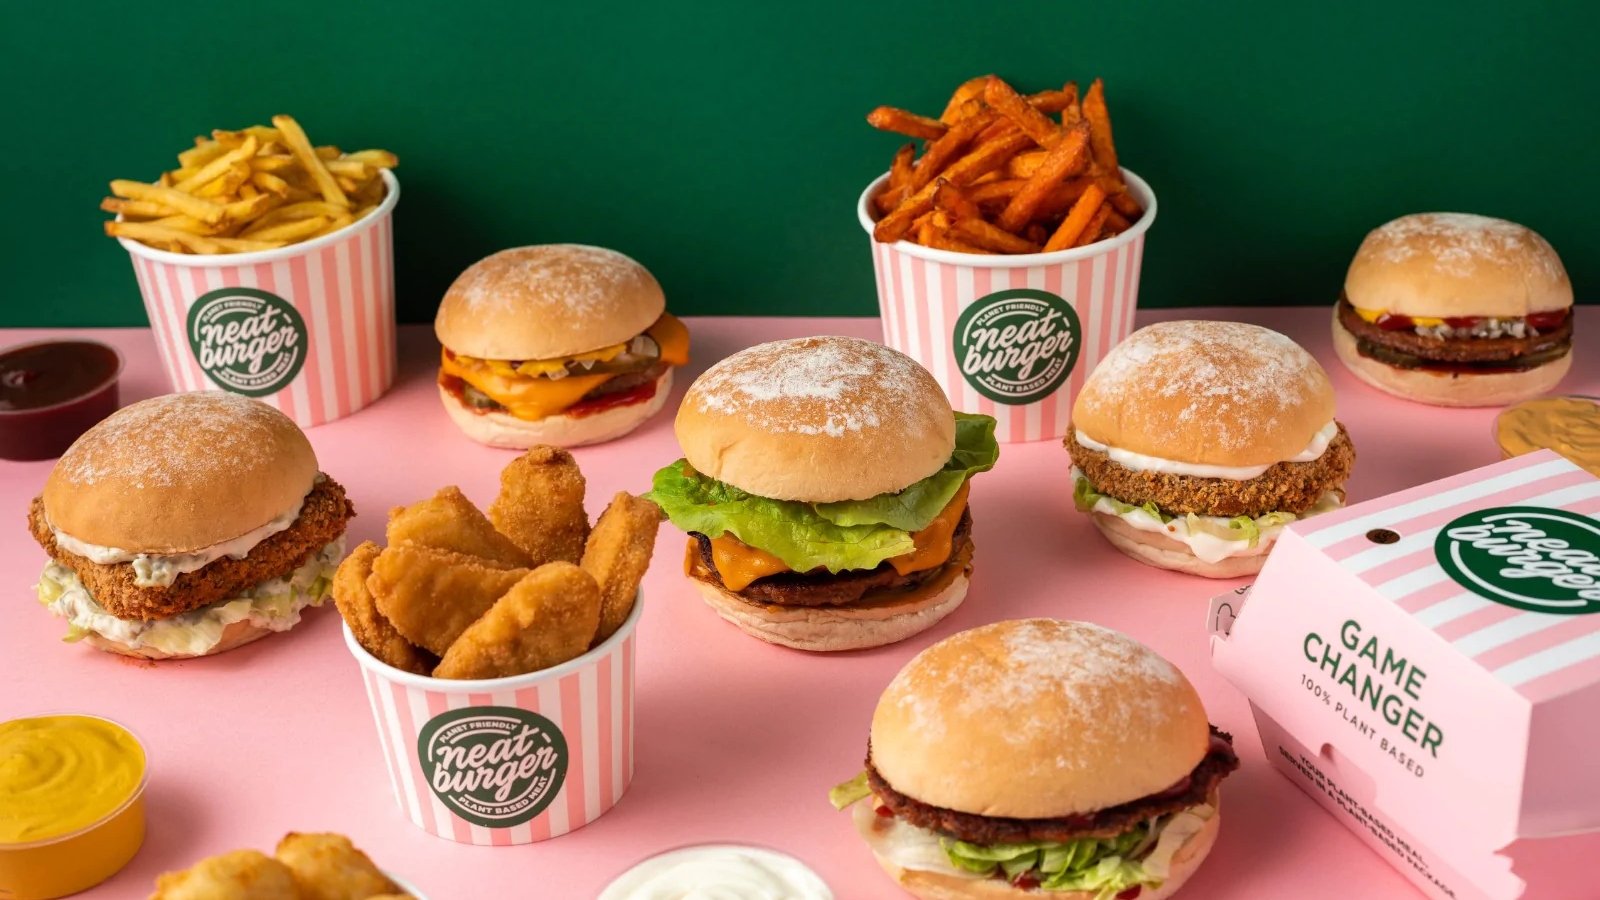 Vegan food brand Neat Burger meals, including a spread of burgers and fries